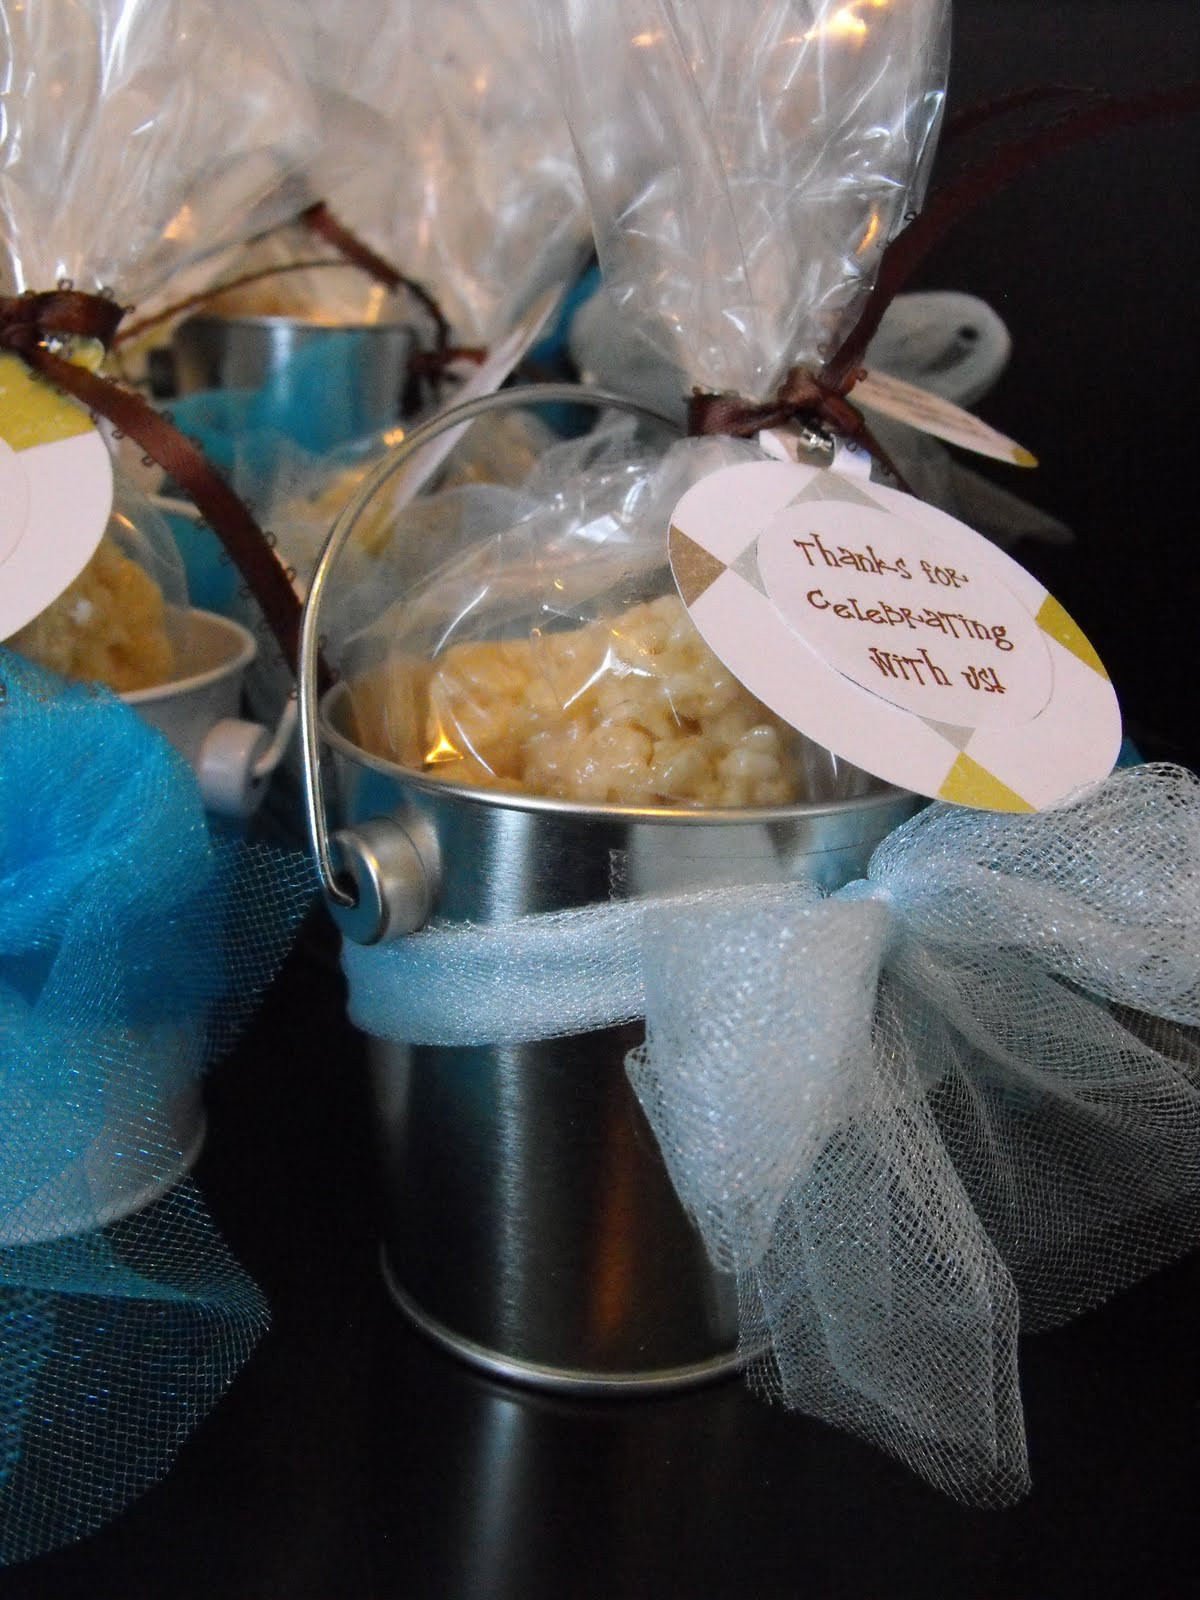 Party Favors Baby Shower Boy
 Baby Shower Party Favors For Boys